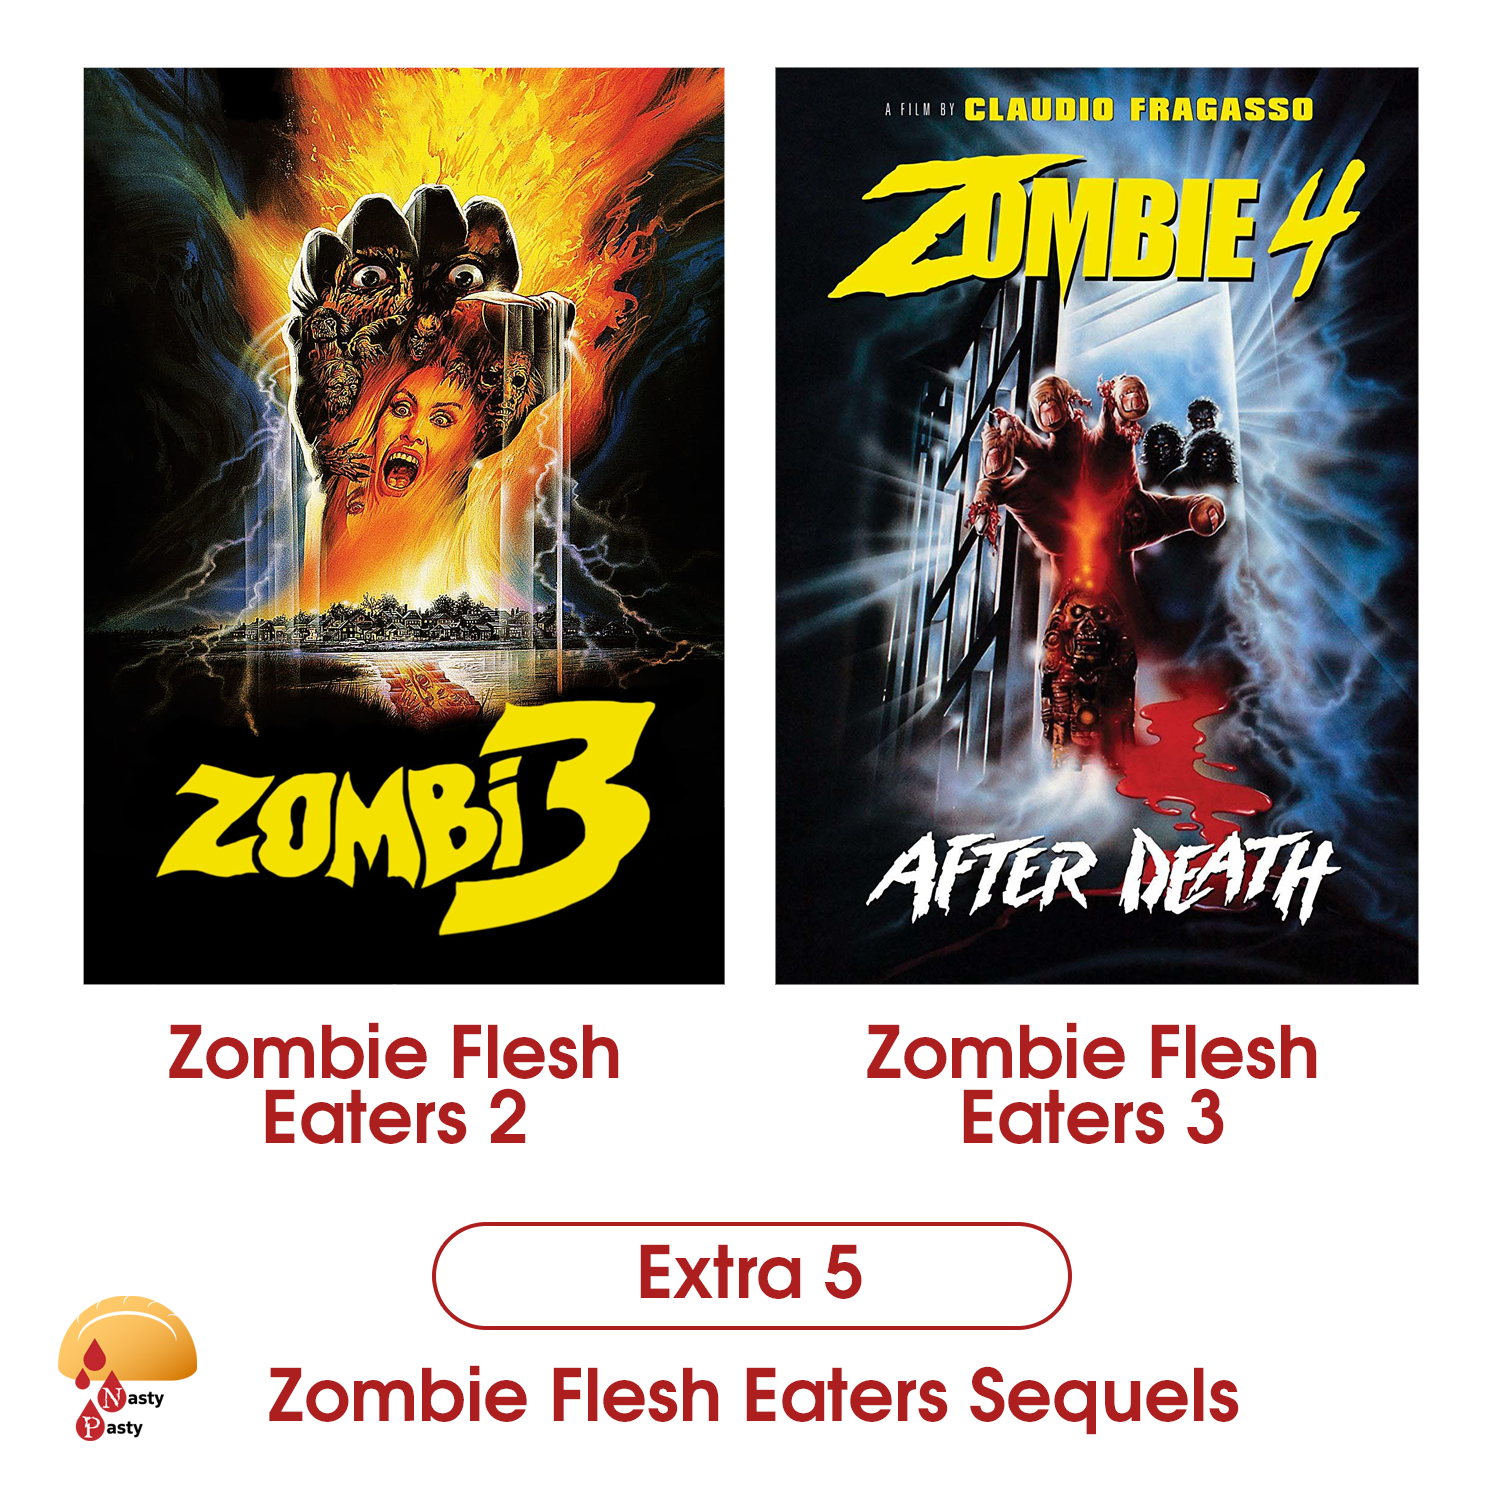 Extra 5: Zombie Flesh Eaters Sequels